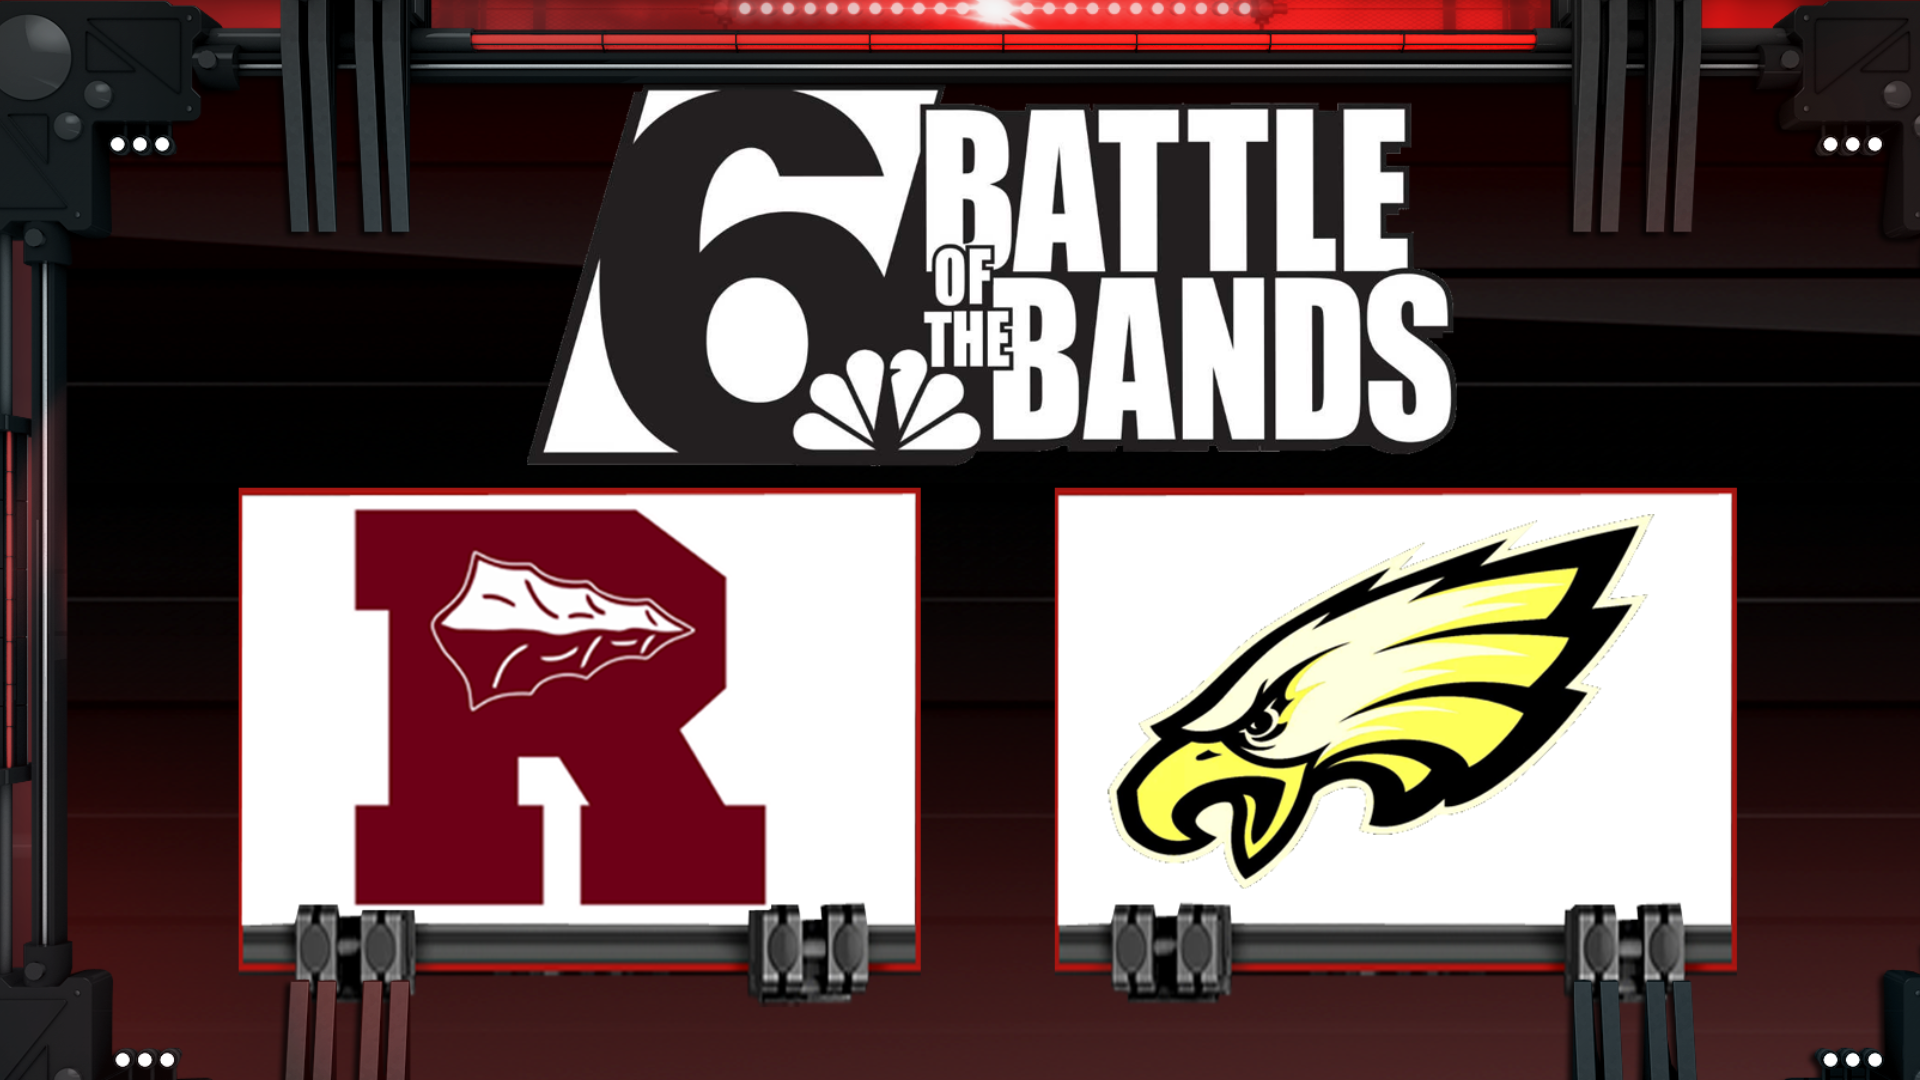 Week eight will feature the Bruceville-Eddy Eagles and Riesel Indians.